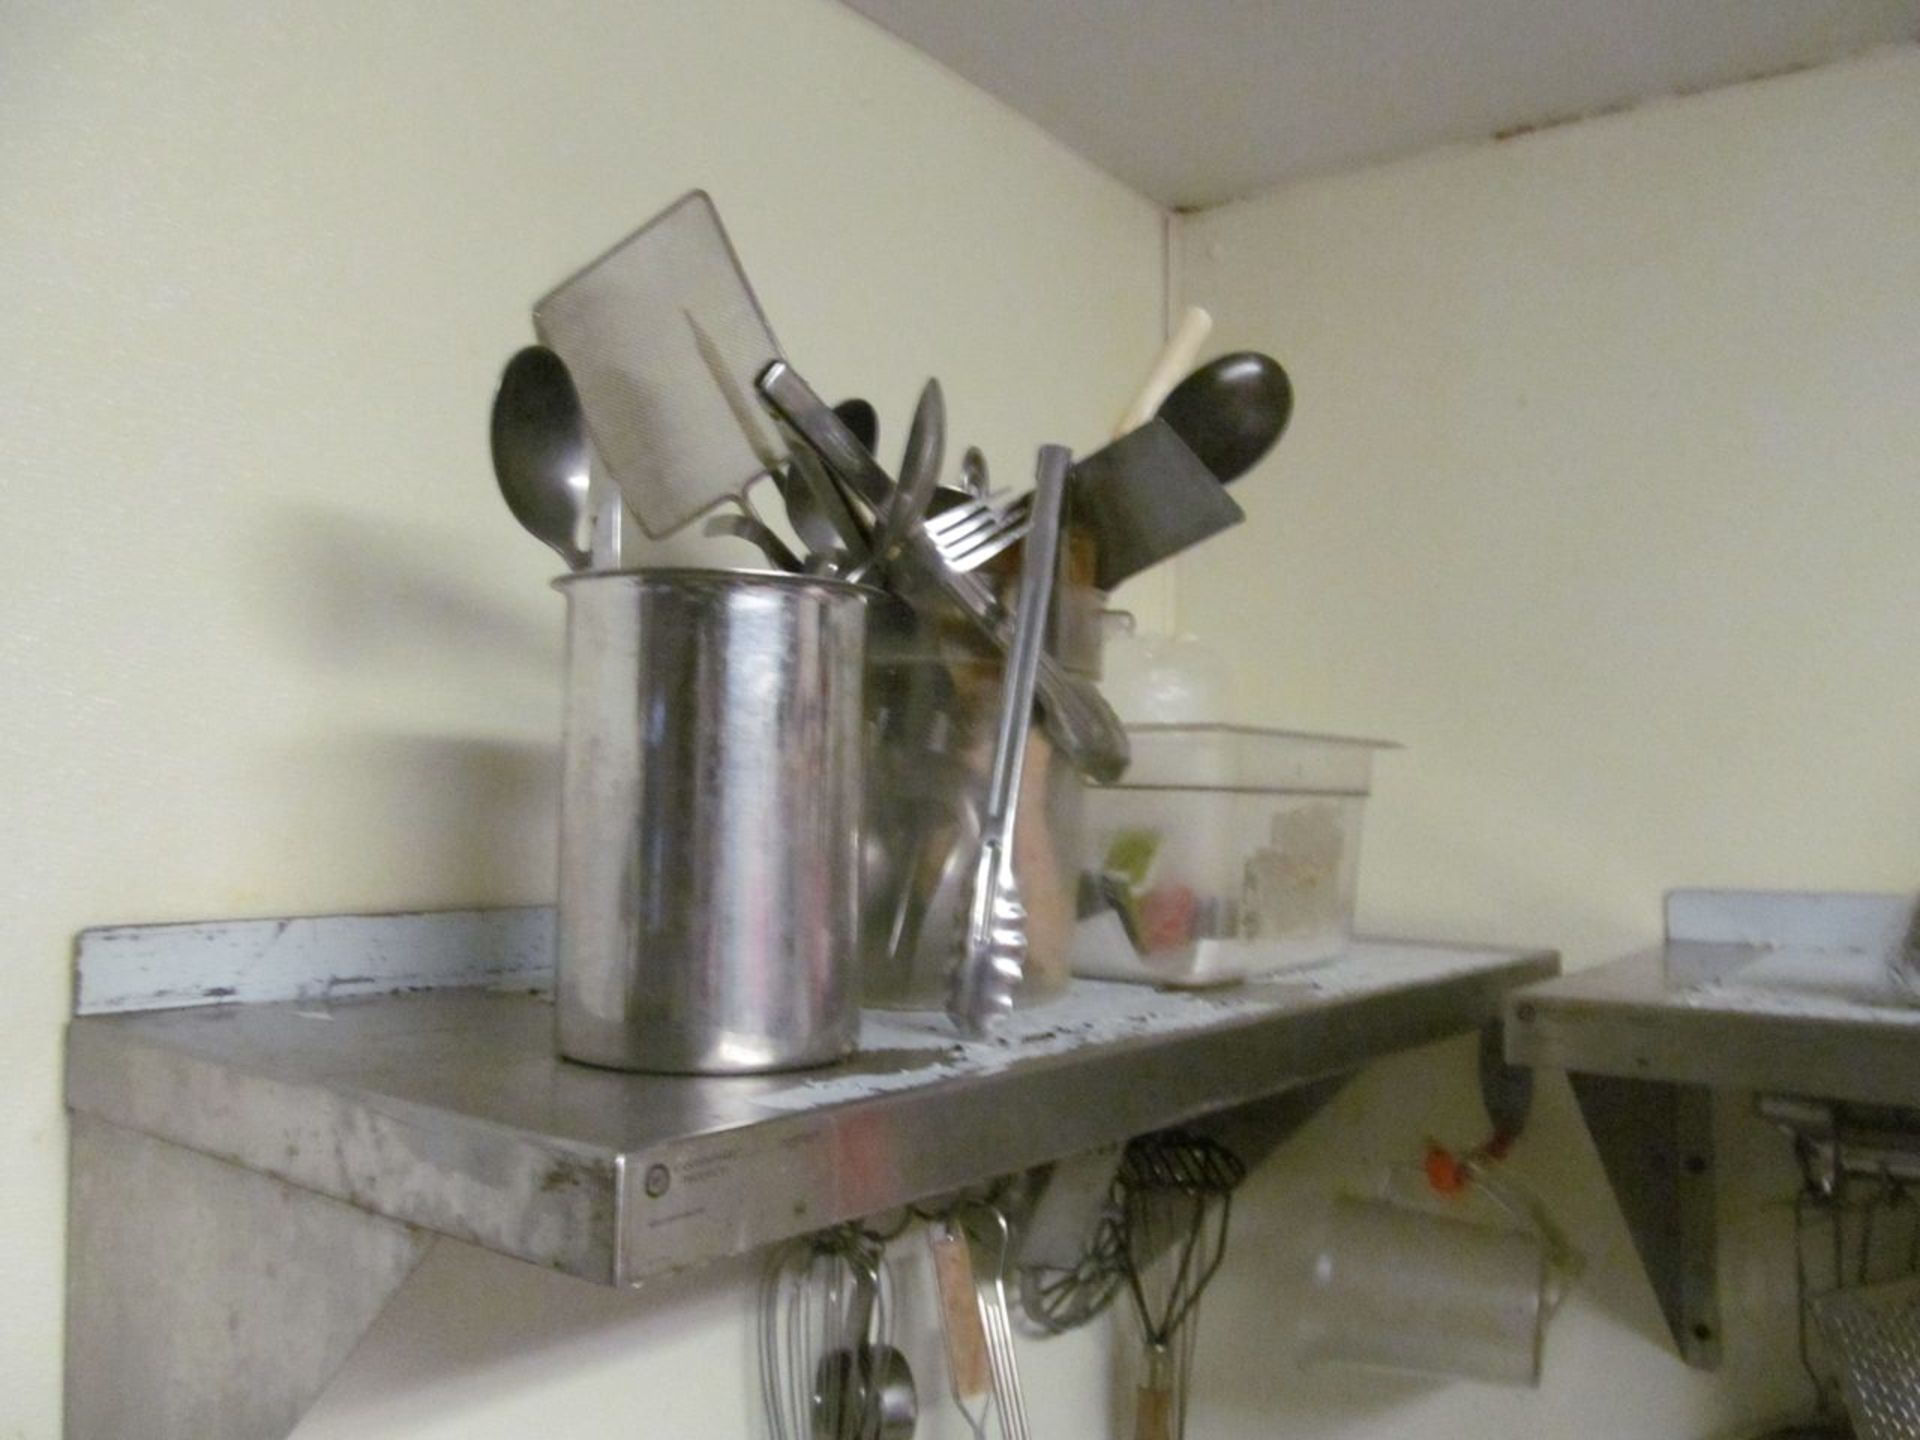 Lot - Misc. Items in Wash Area, to Include: Hanging Utensils, (4) Shelving Units, Utensils, - Image 4 of 7